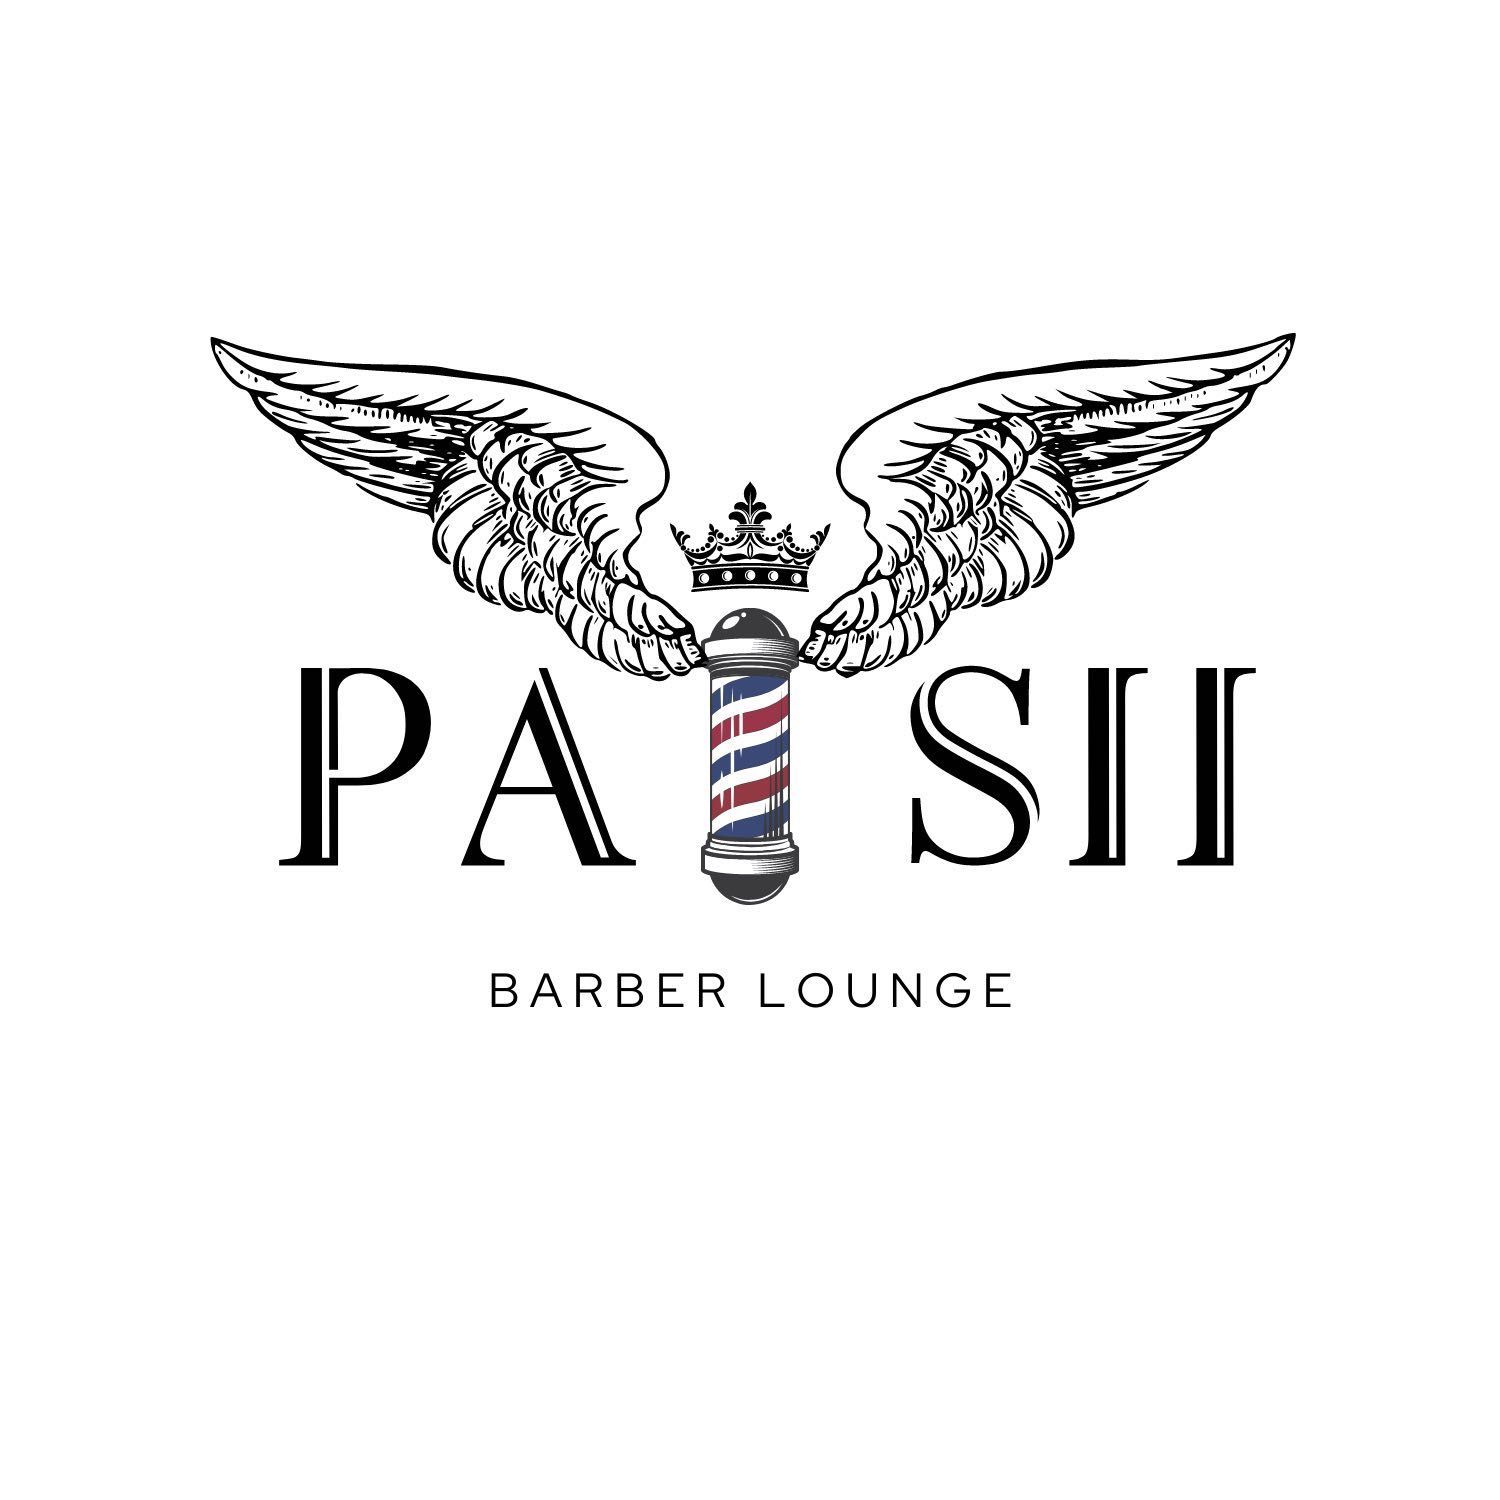 PAISII Barber Lounge, 3135 Fairland Rd, Silver Spring, 20904